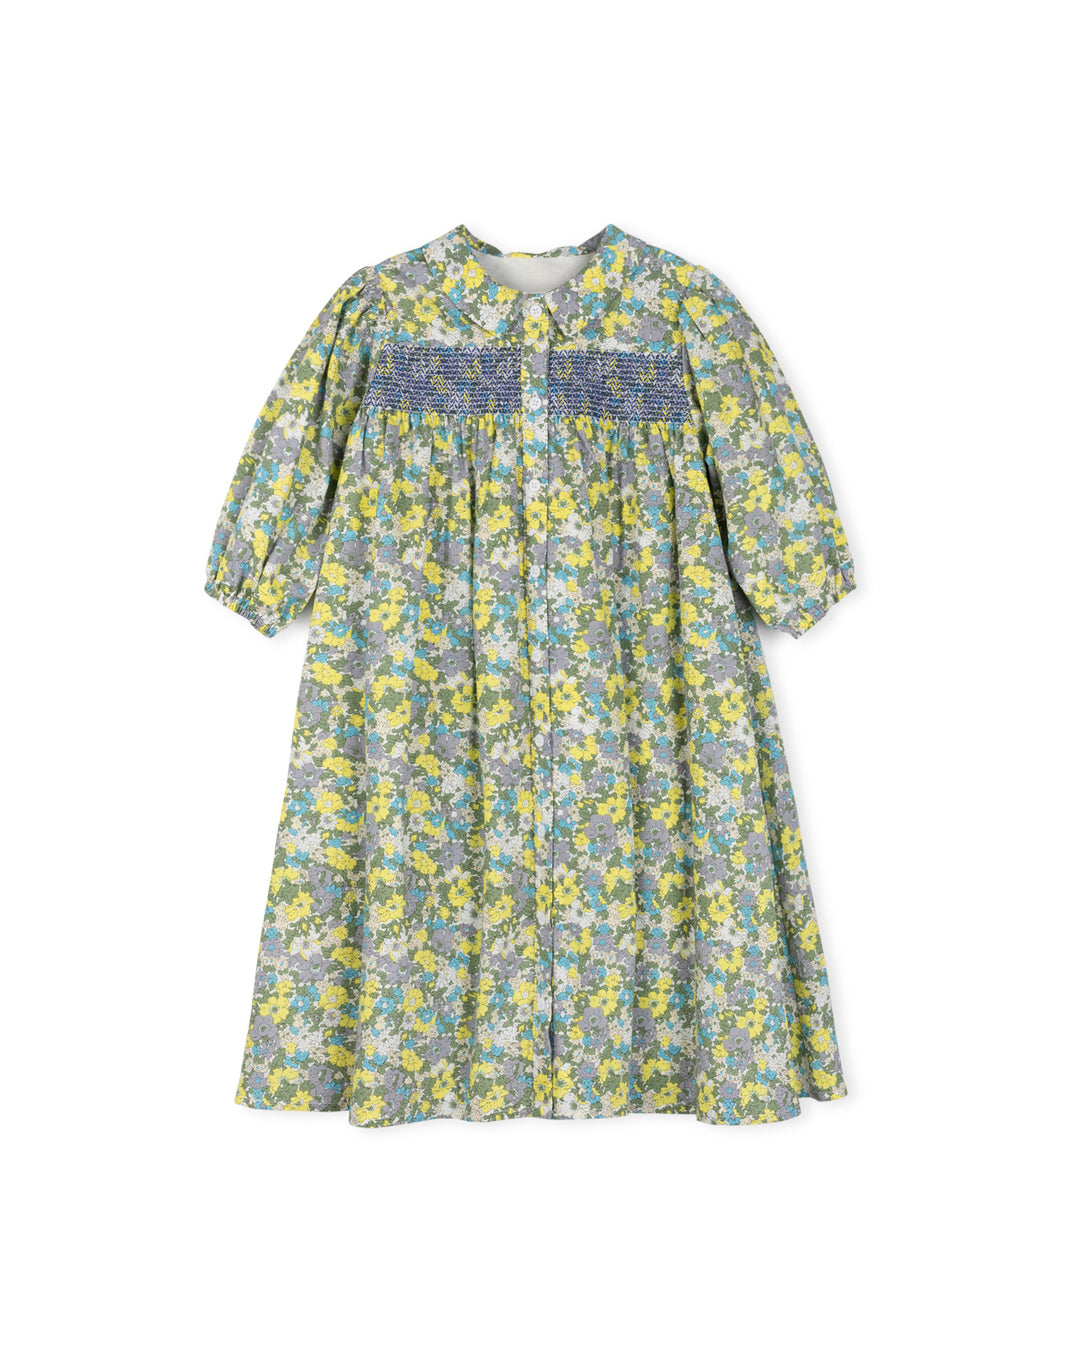 PAPILLON YELLOW FLORAL SMOCKED DRESS